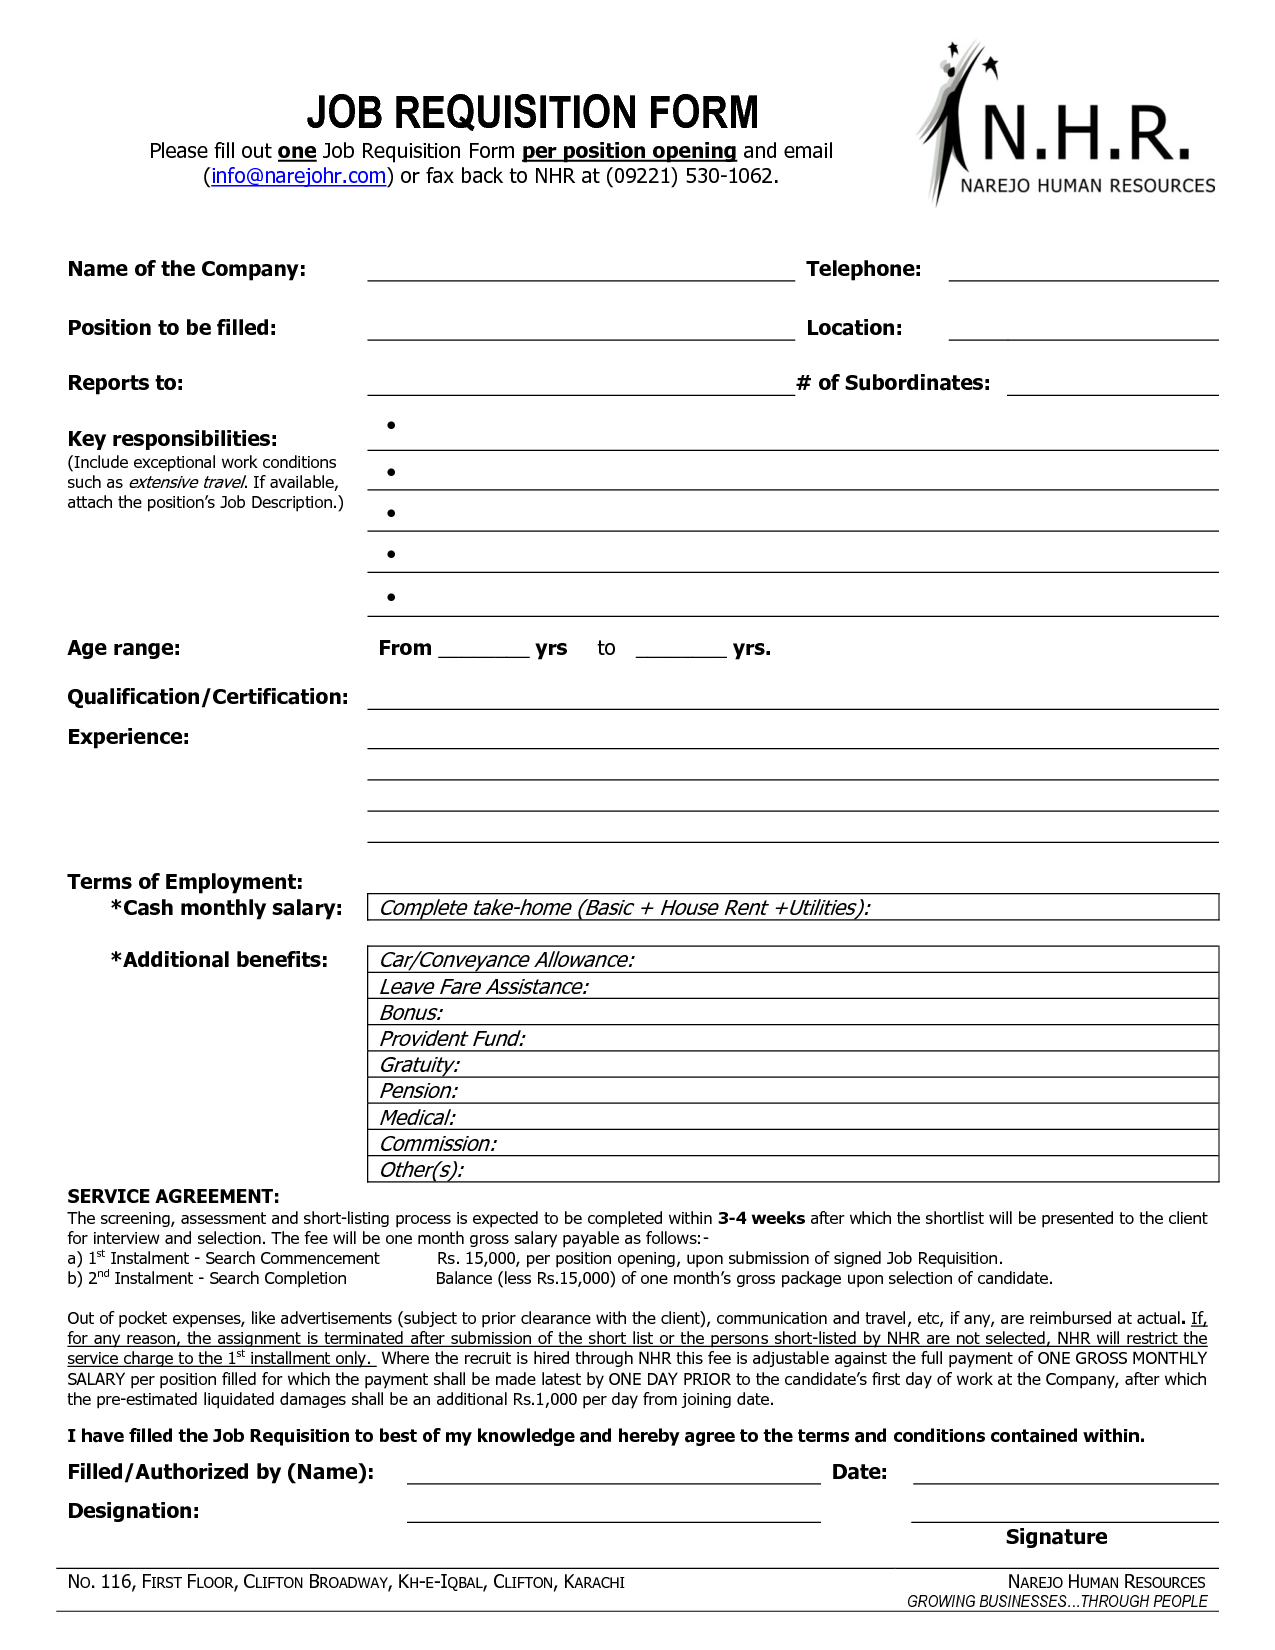 job requisition template April.onthemarch.co